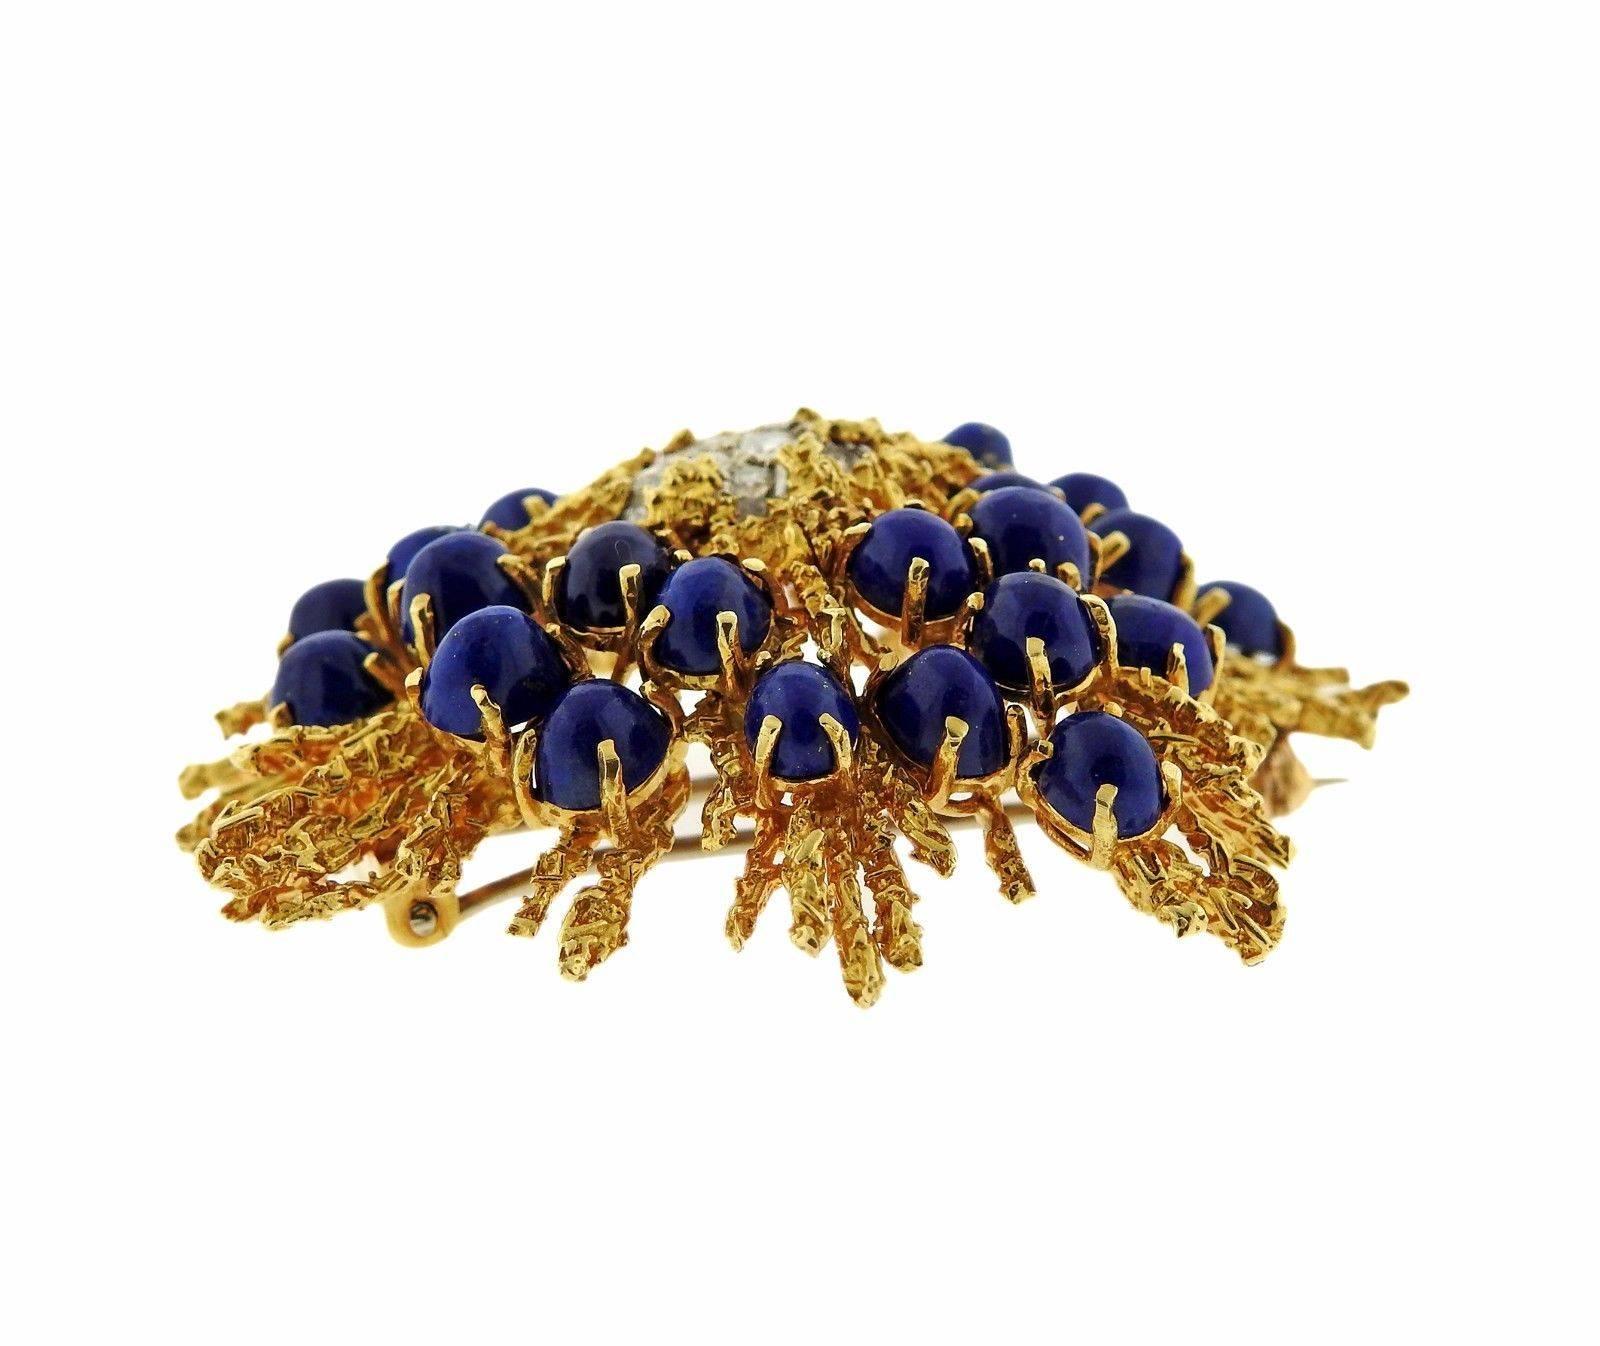 An 18k yellow and white gold brooch set with lapis and approximately 0.80ctw of GH/VS diamonds.  The brooch measures 50mm x 45mm and weighs 33.8 grams.